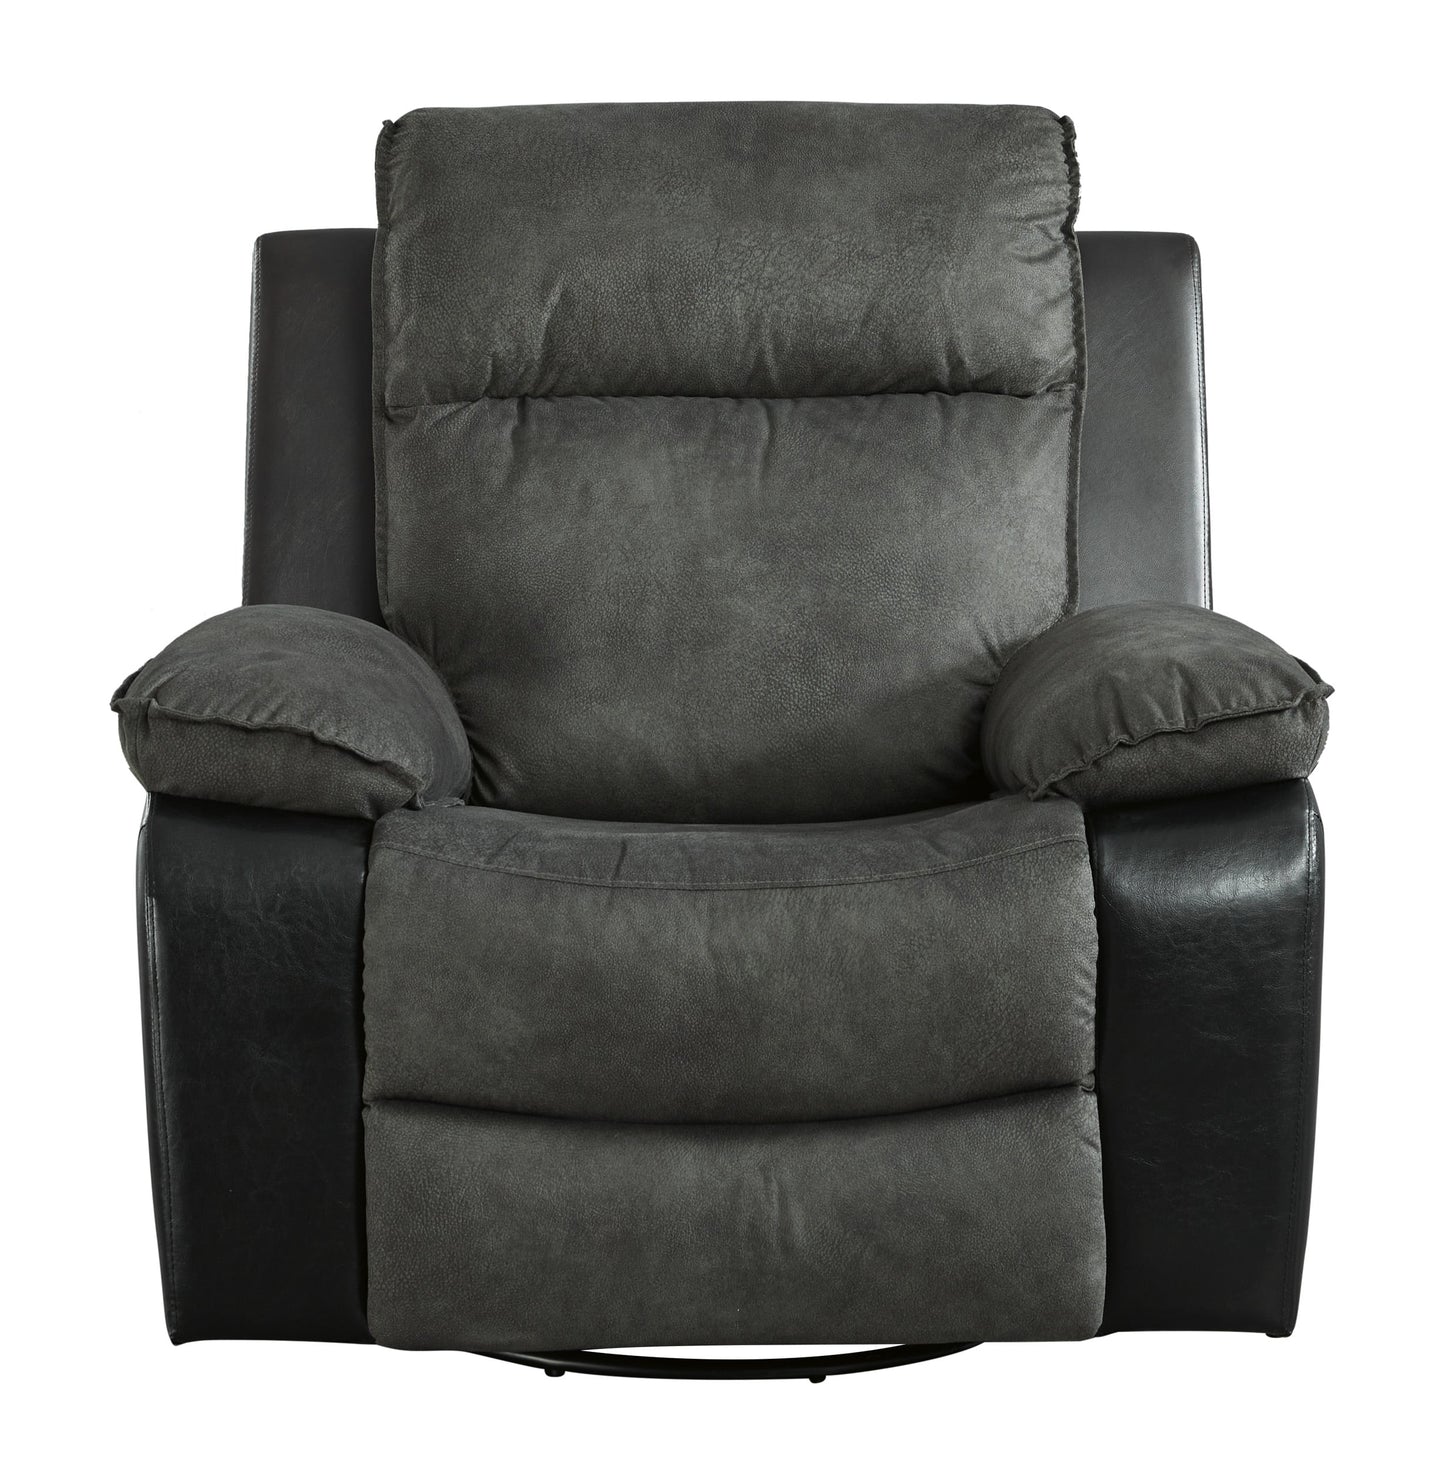 Woodsway Swivel Glider Leather Look Recliner